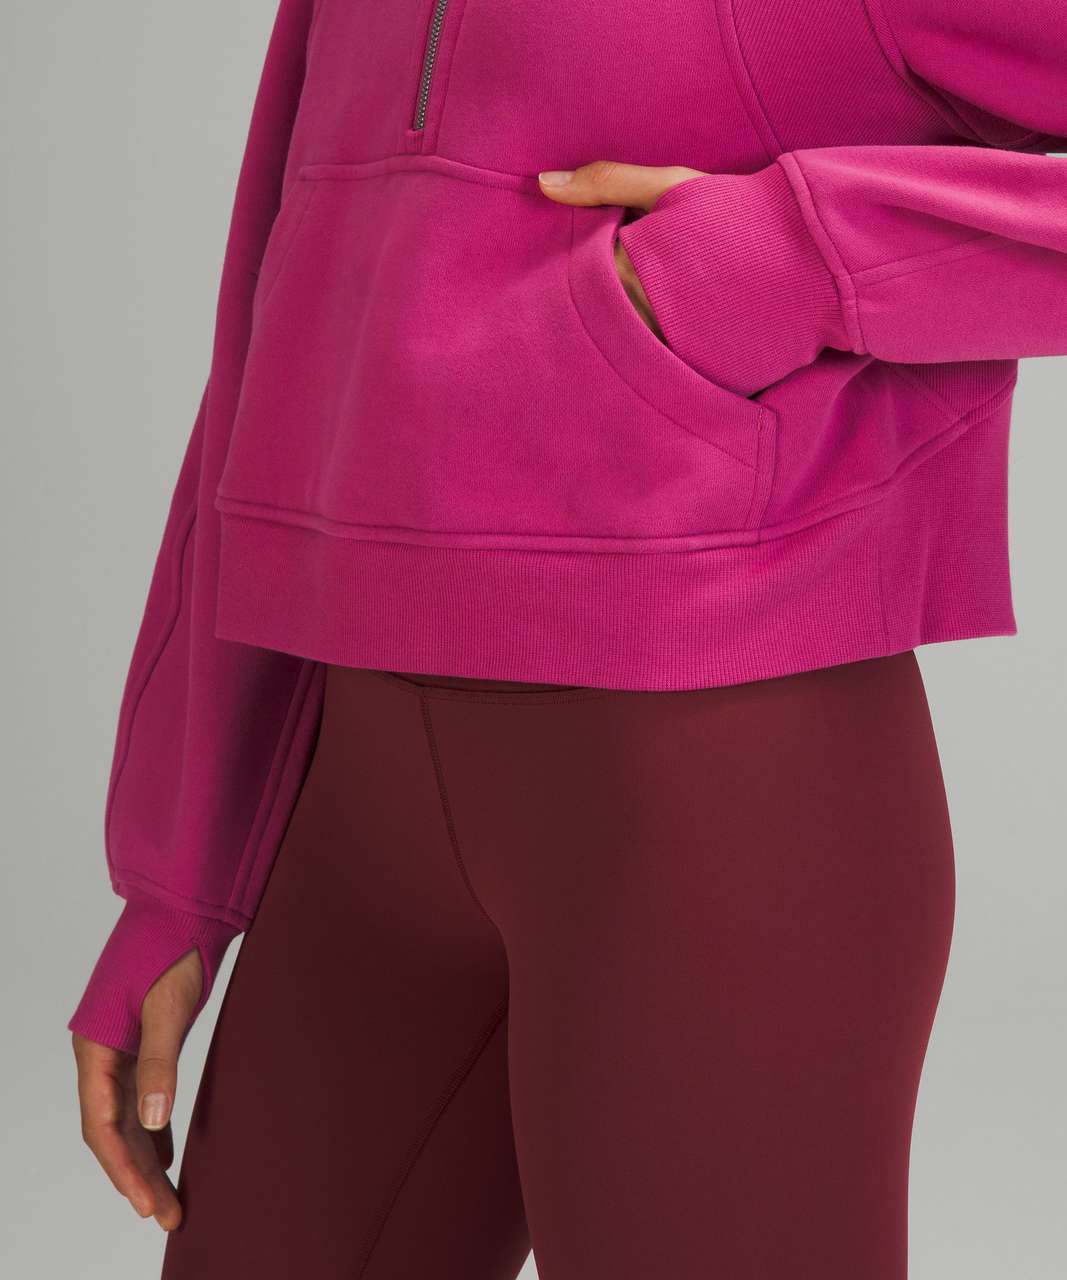 Photoshopped* Some of my dream scuba full zips! Pink lychee, french press,  and aztec brick ♥️♥️♥️ : r/lululemon